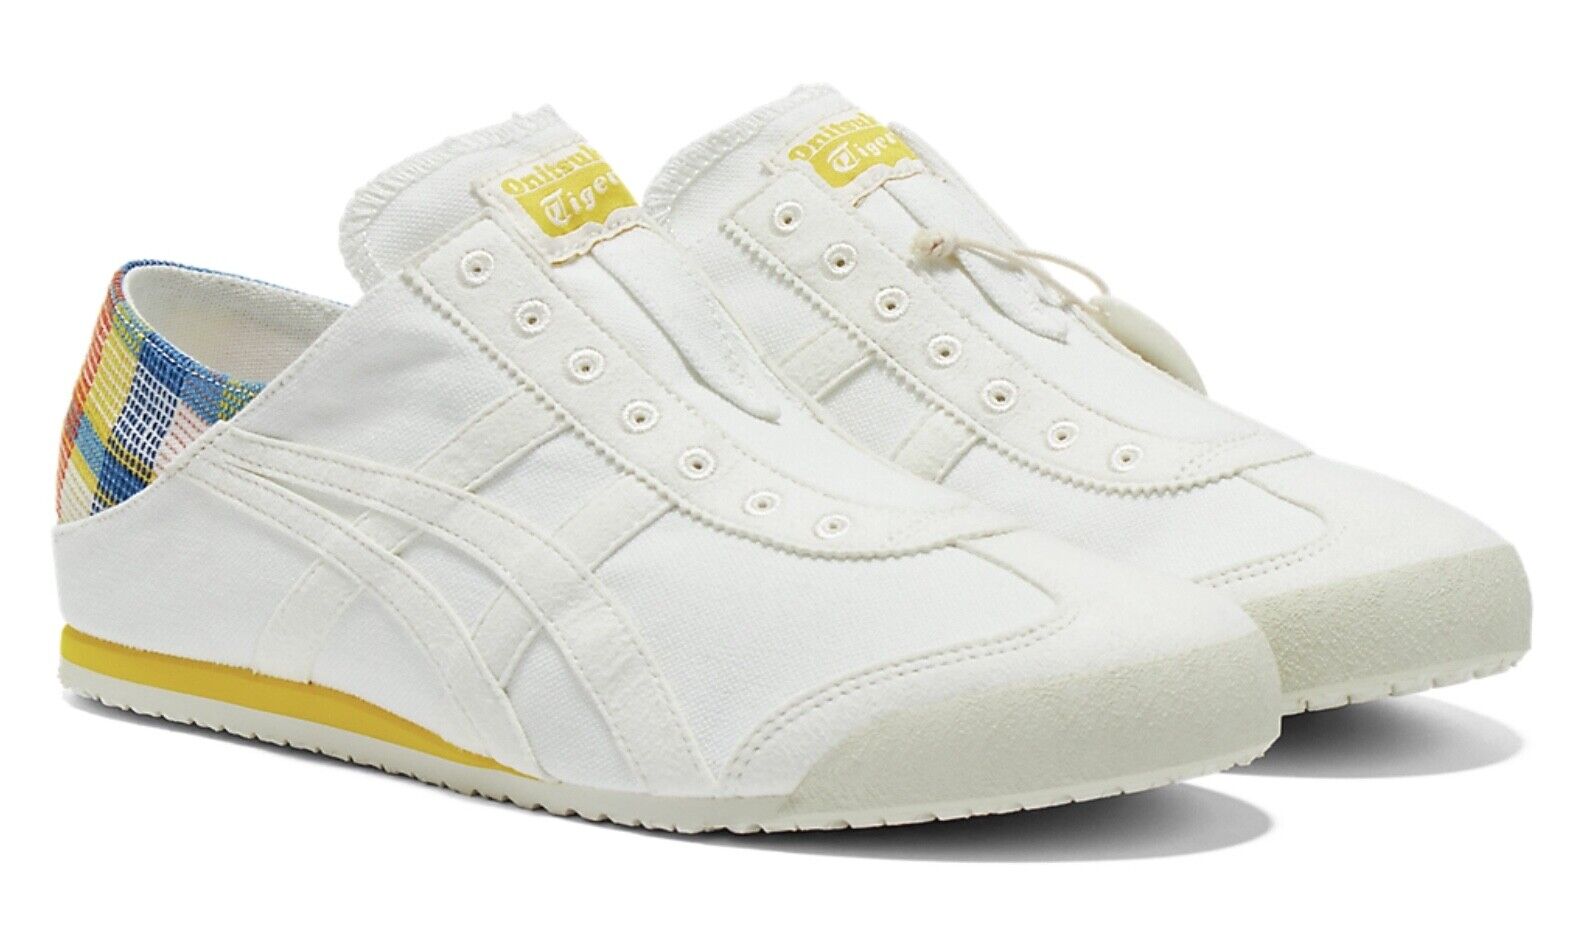 Clever Onitsuka Tiger MEXICO 66 PARATY COLOR:CREAM/CREAM  NEW WITH BOX From Japan on eBay